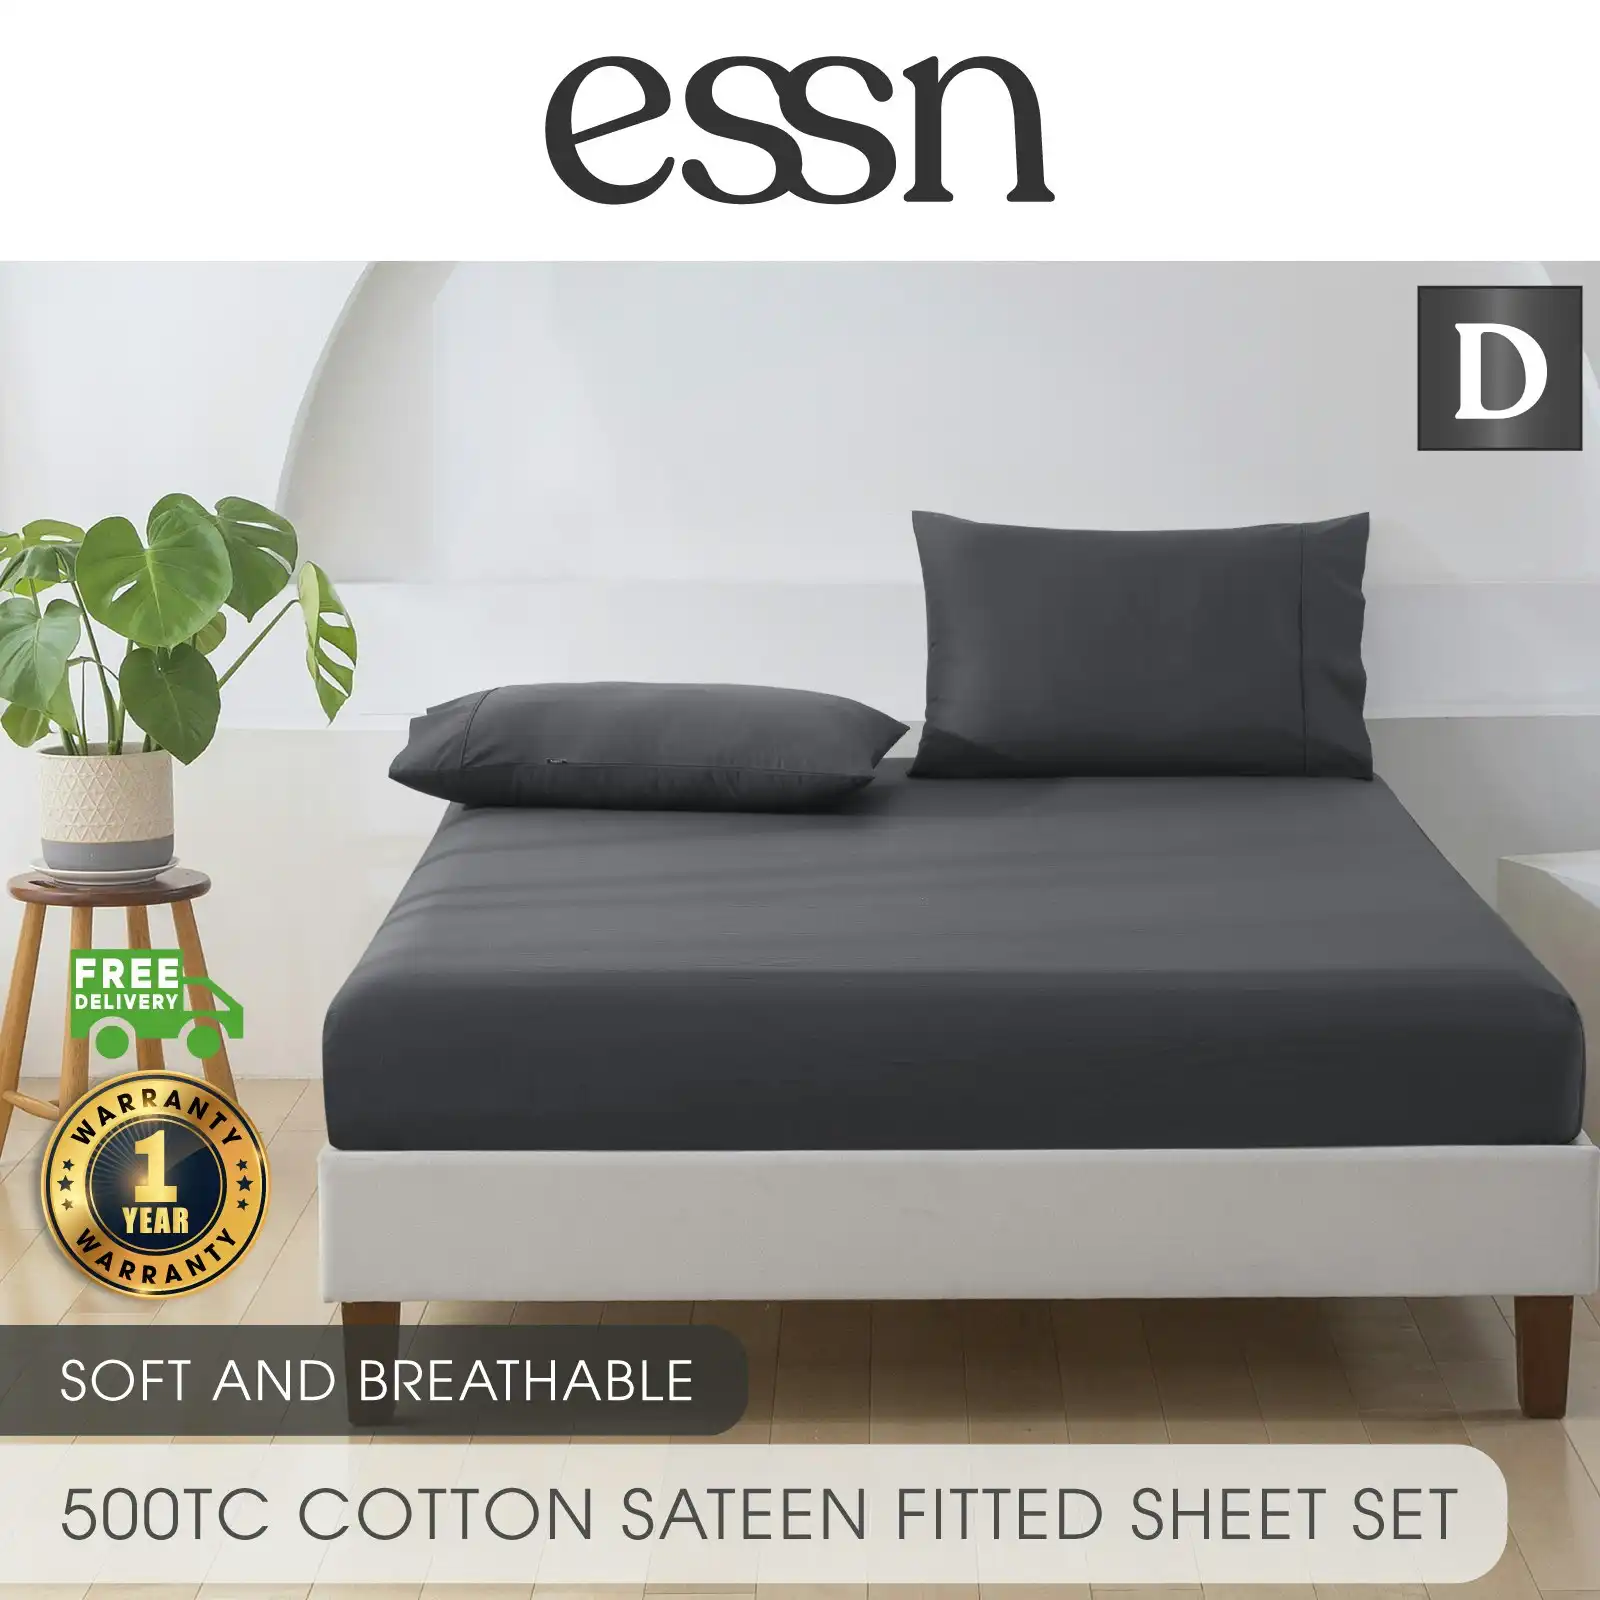 ESSN 500TC Cotton Sateen Fitted Sheet Set Charcoal  Double Bed